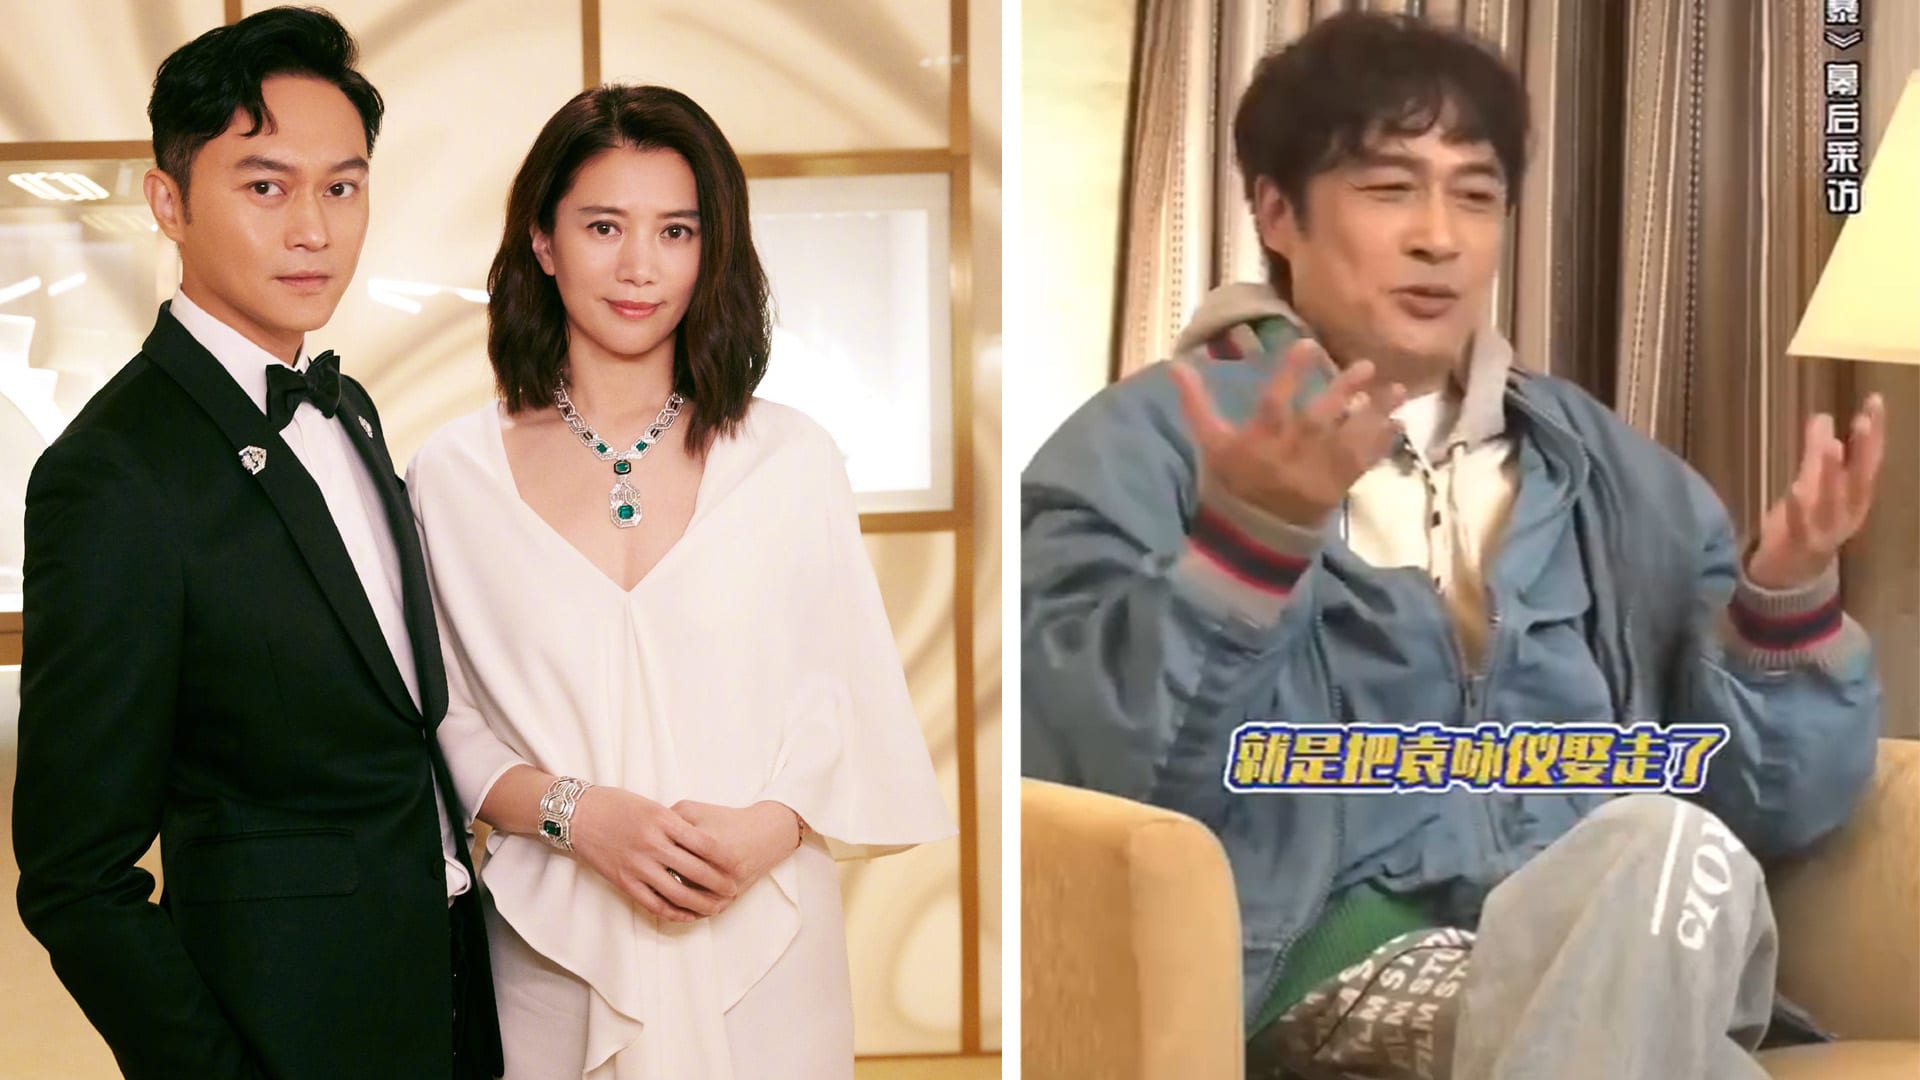 Anita Yuen Claps Back At Francis Ng Who Said Her Hubby Julian Cheung “Saved The World” By Marrying Her